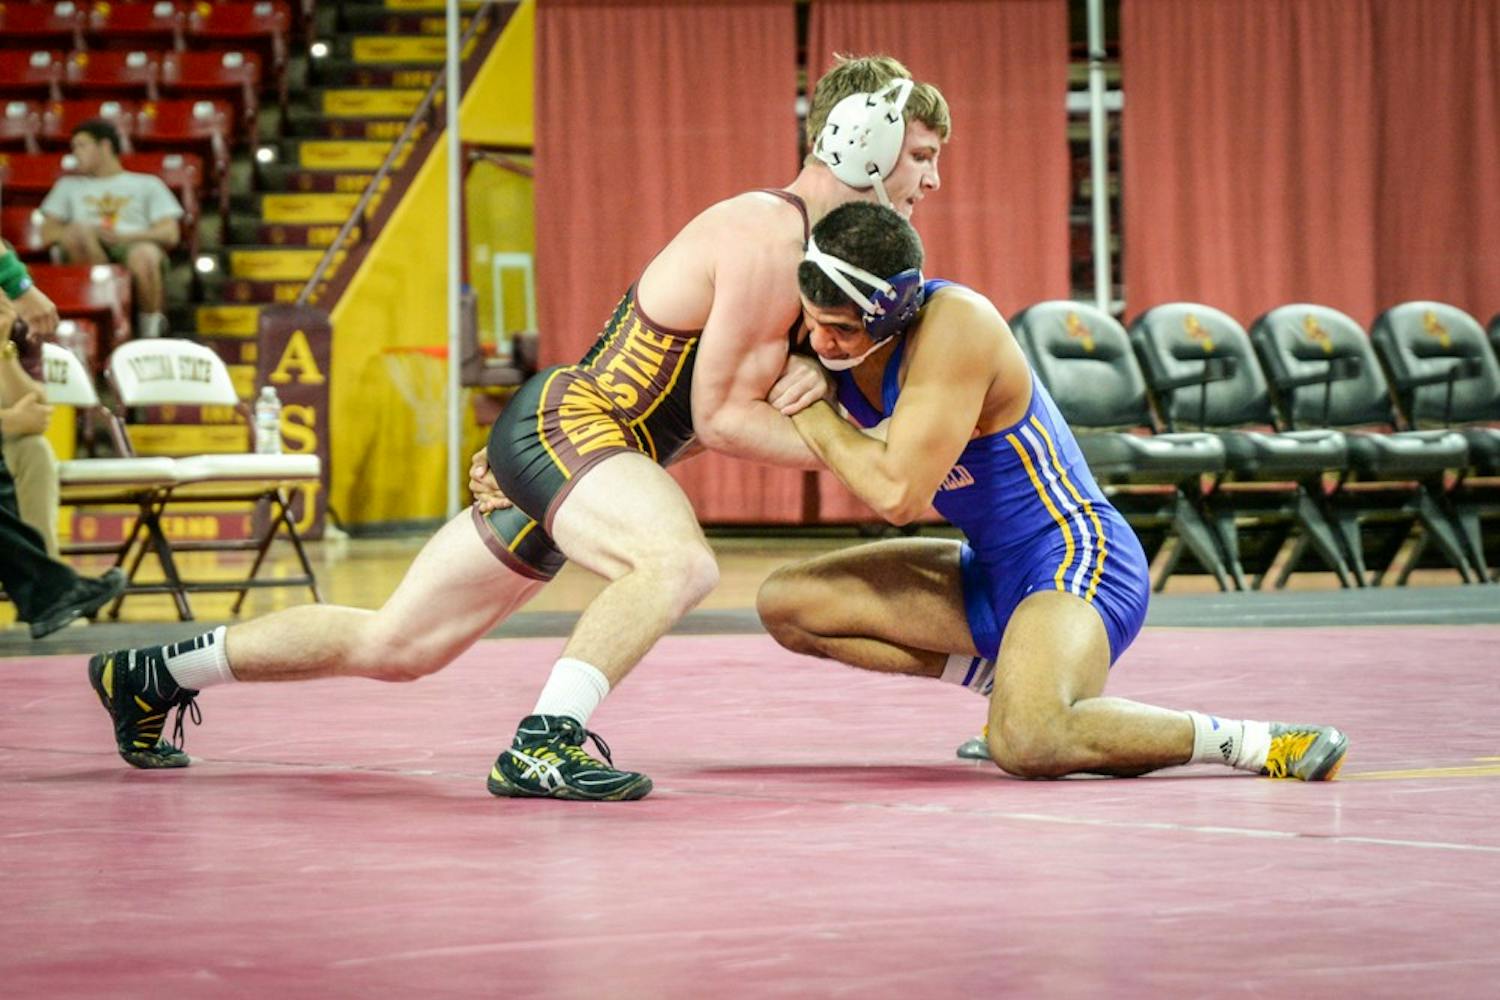 In a match against Utah Valley University on Saturday, Jan. 18, ASU's Joel Smith grapples with his opponent to gain the upper hand. (Photo by Mario Mendez)